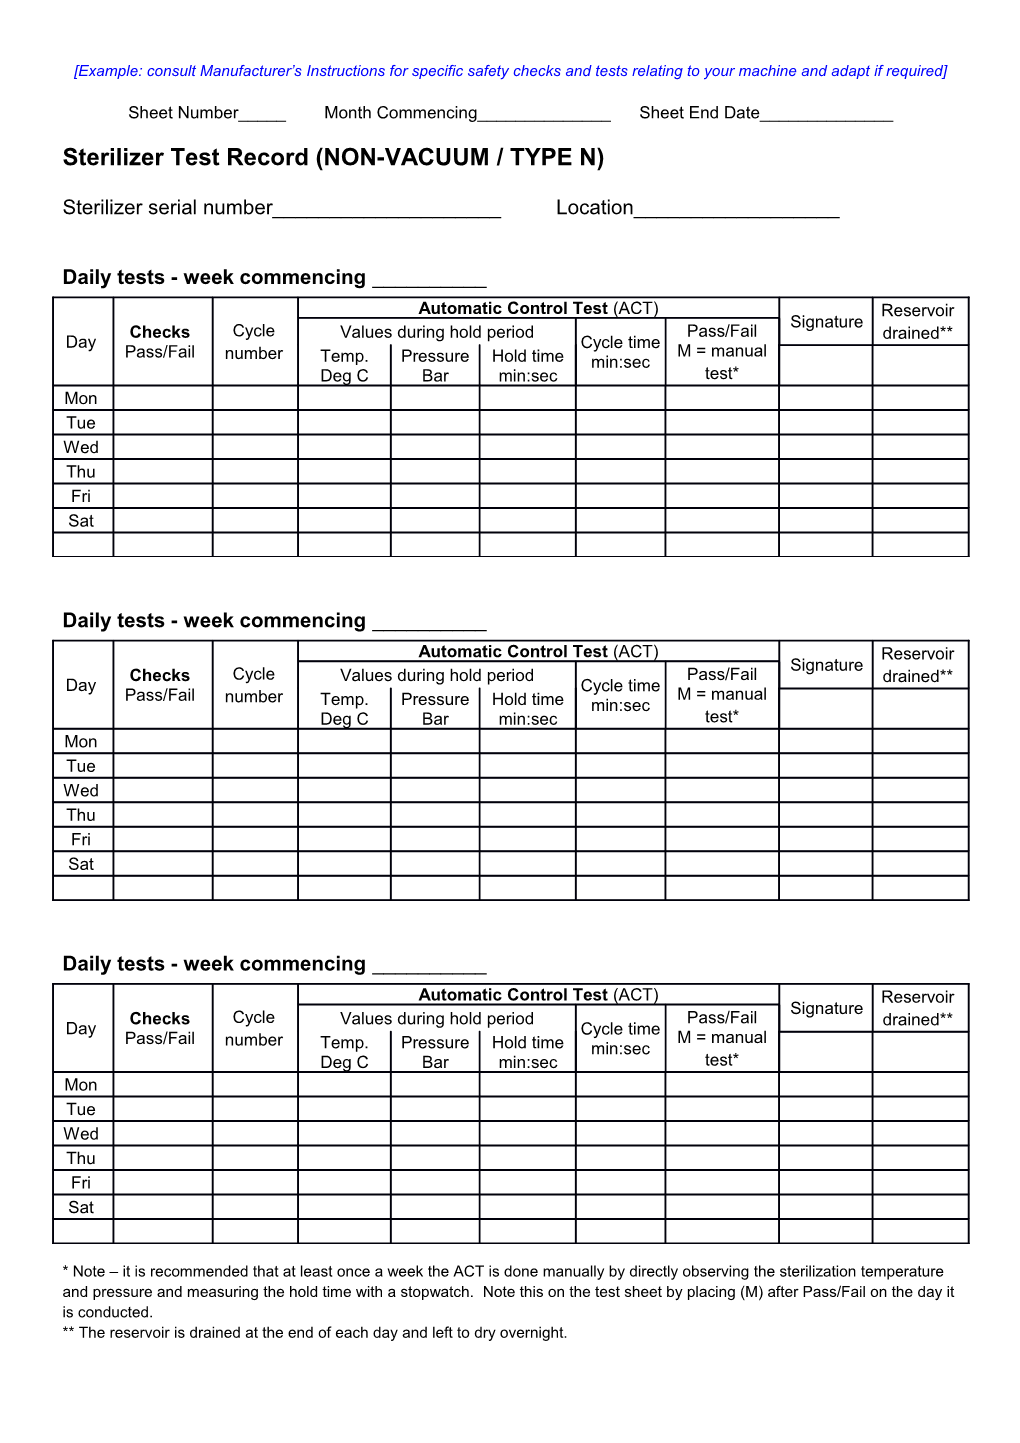 Autoclave History Record Sheet (Type N)